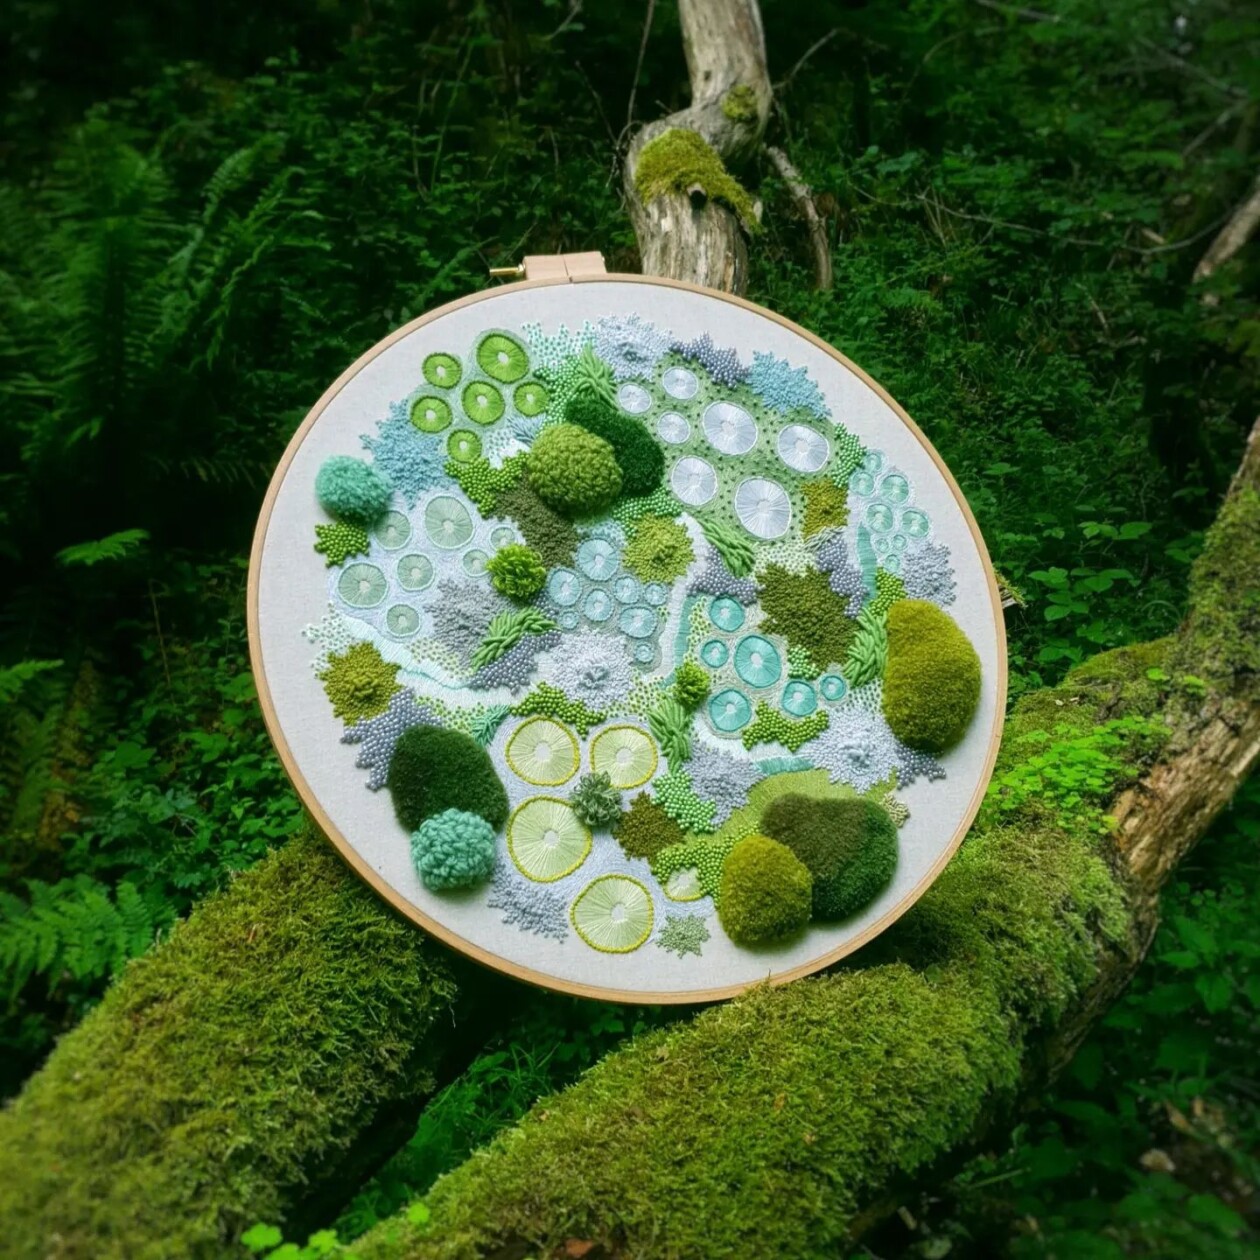 Marvelous Embroideries Inspired By Moss, Coral, And Lichen Forms By Hannah Kwasnycia (3)